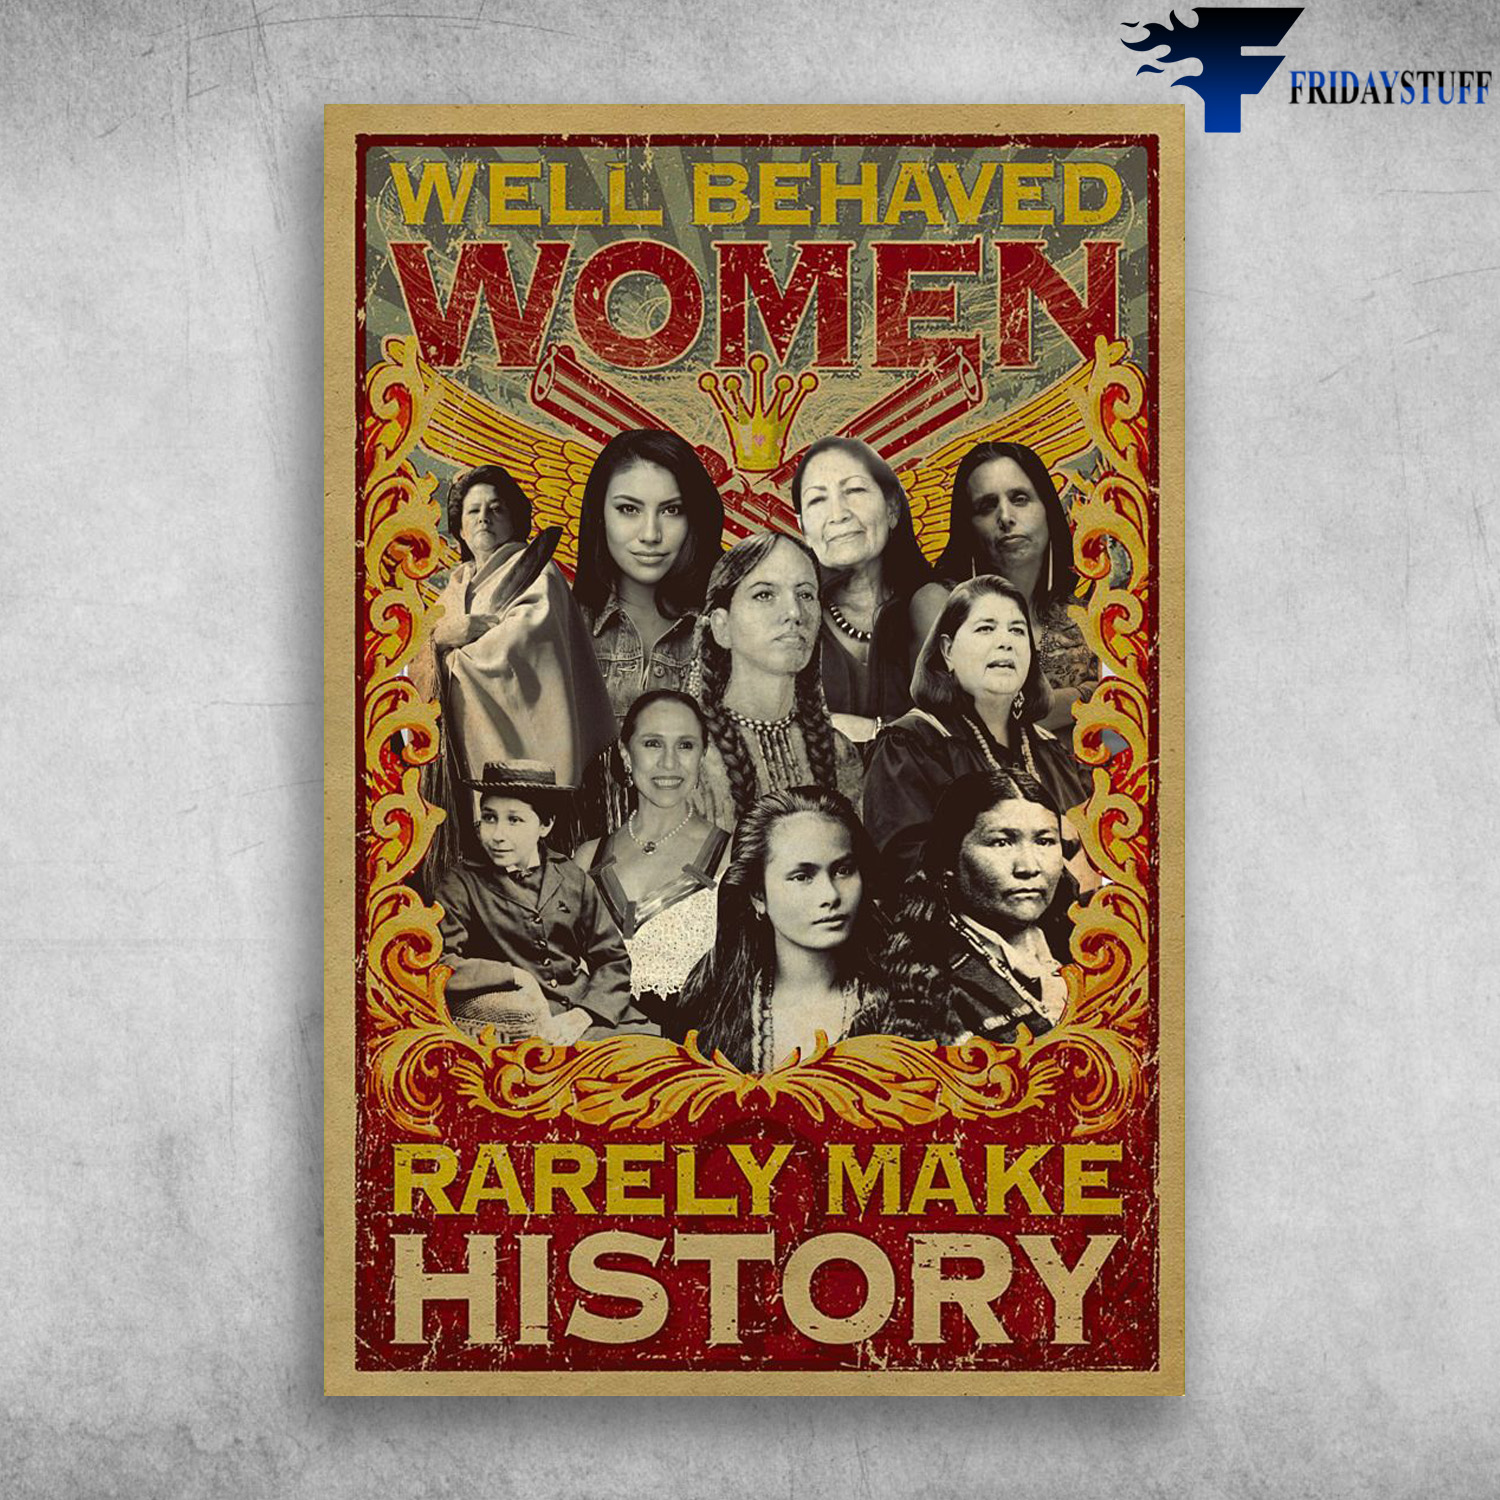 The Women - Well Behaved Women Rarely Make History